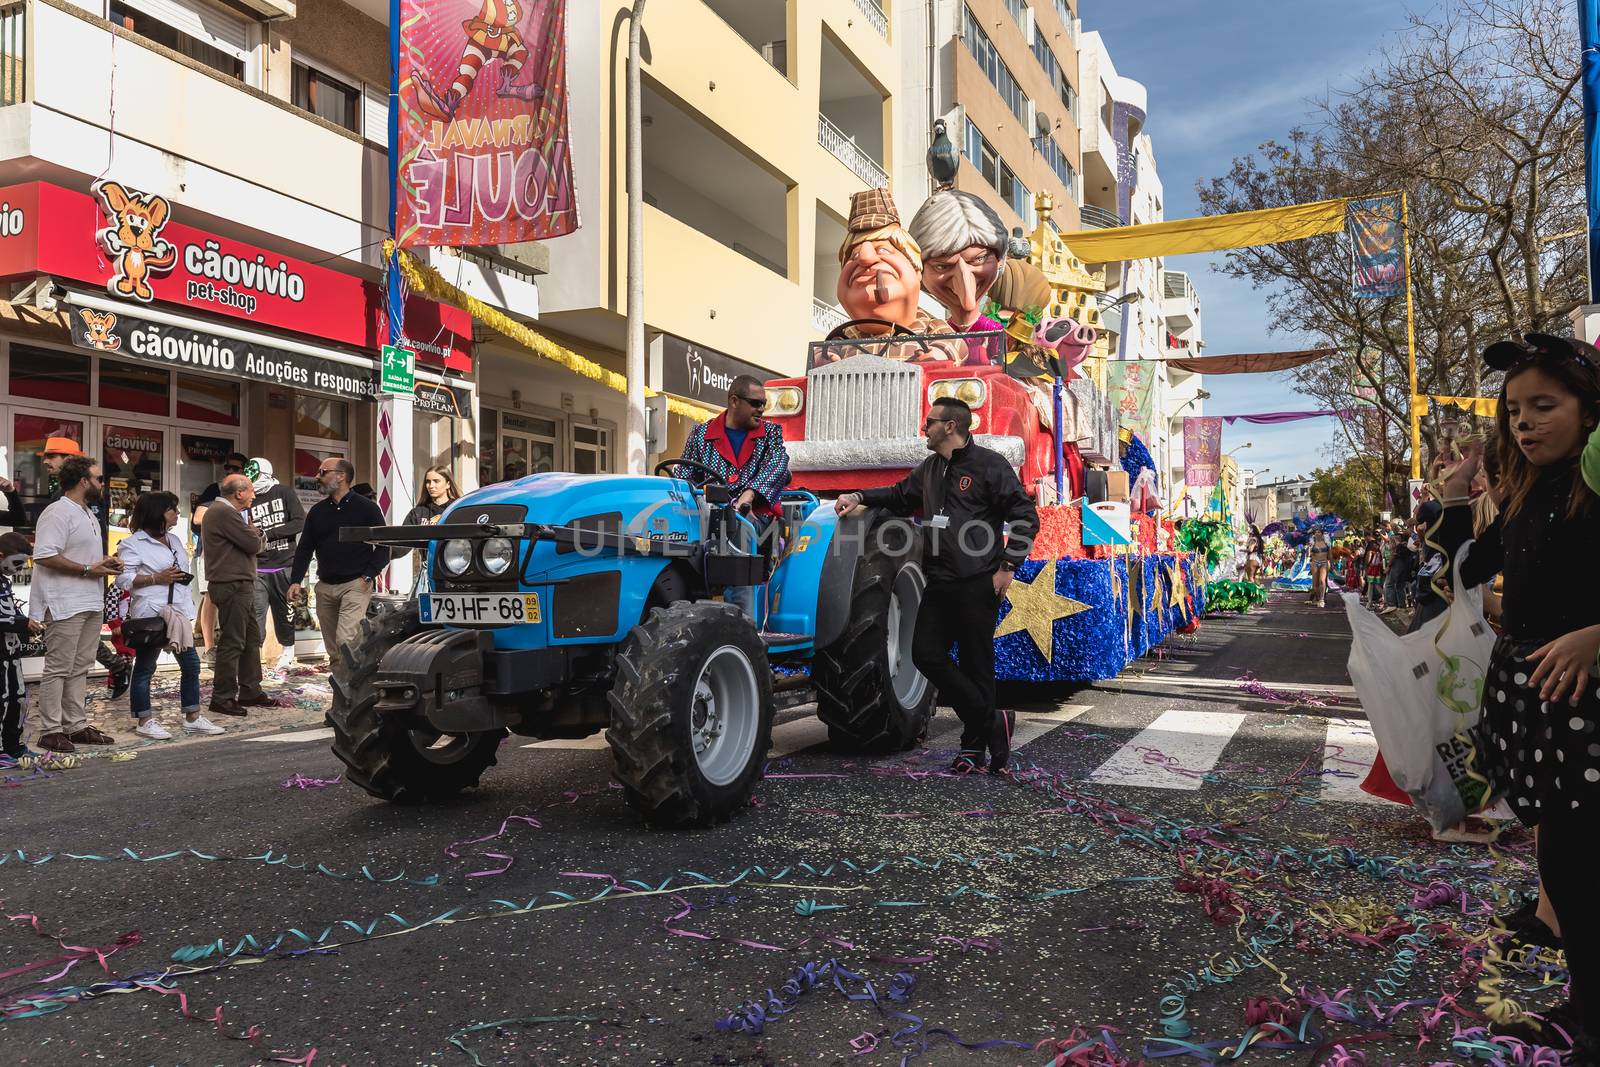 Loule, Portugal - February 25, 2020: BREXIT float parading in the street in front of the public in the parade of the traditional carnival of Loule city on a February day